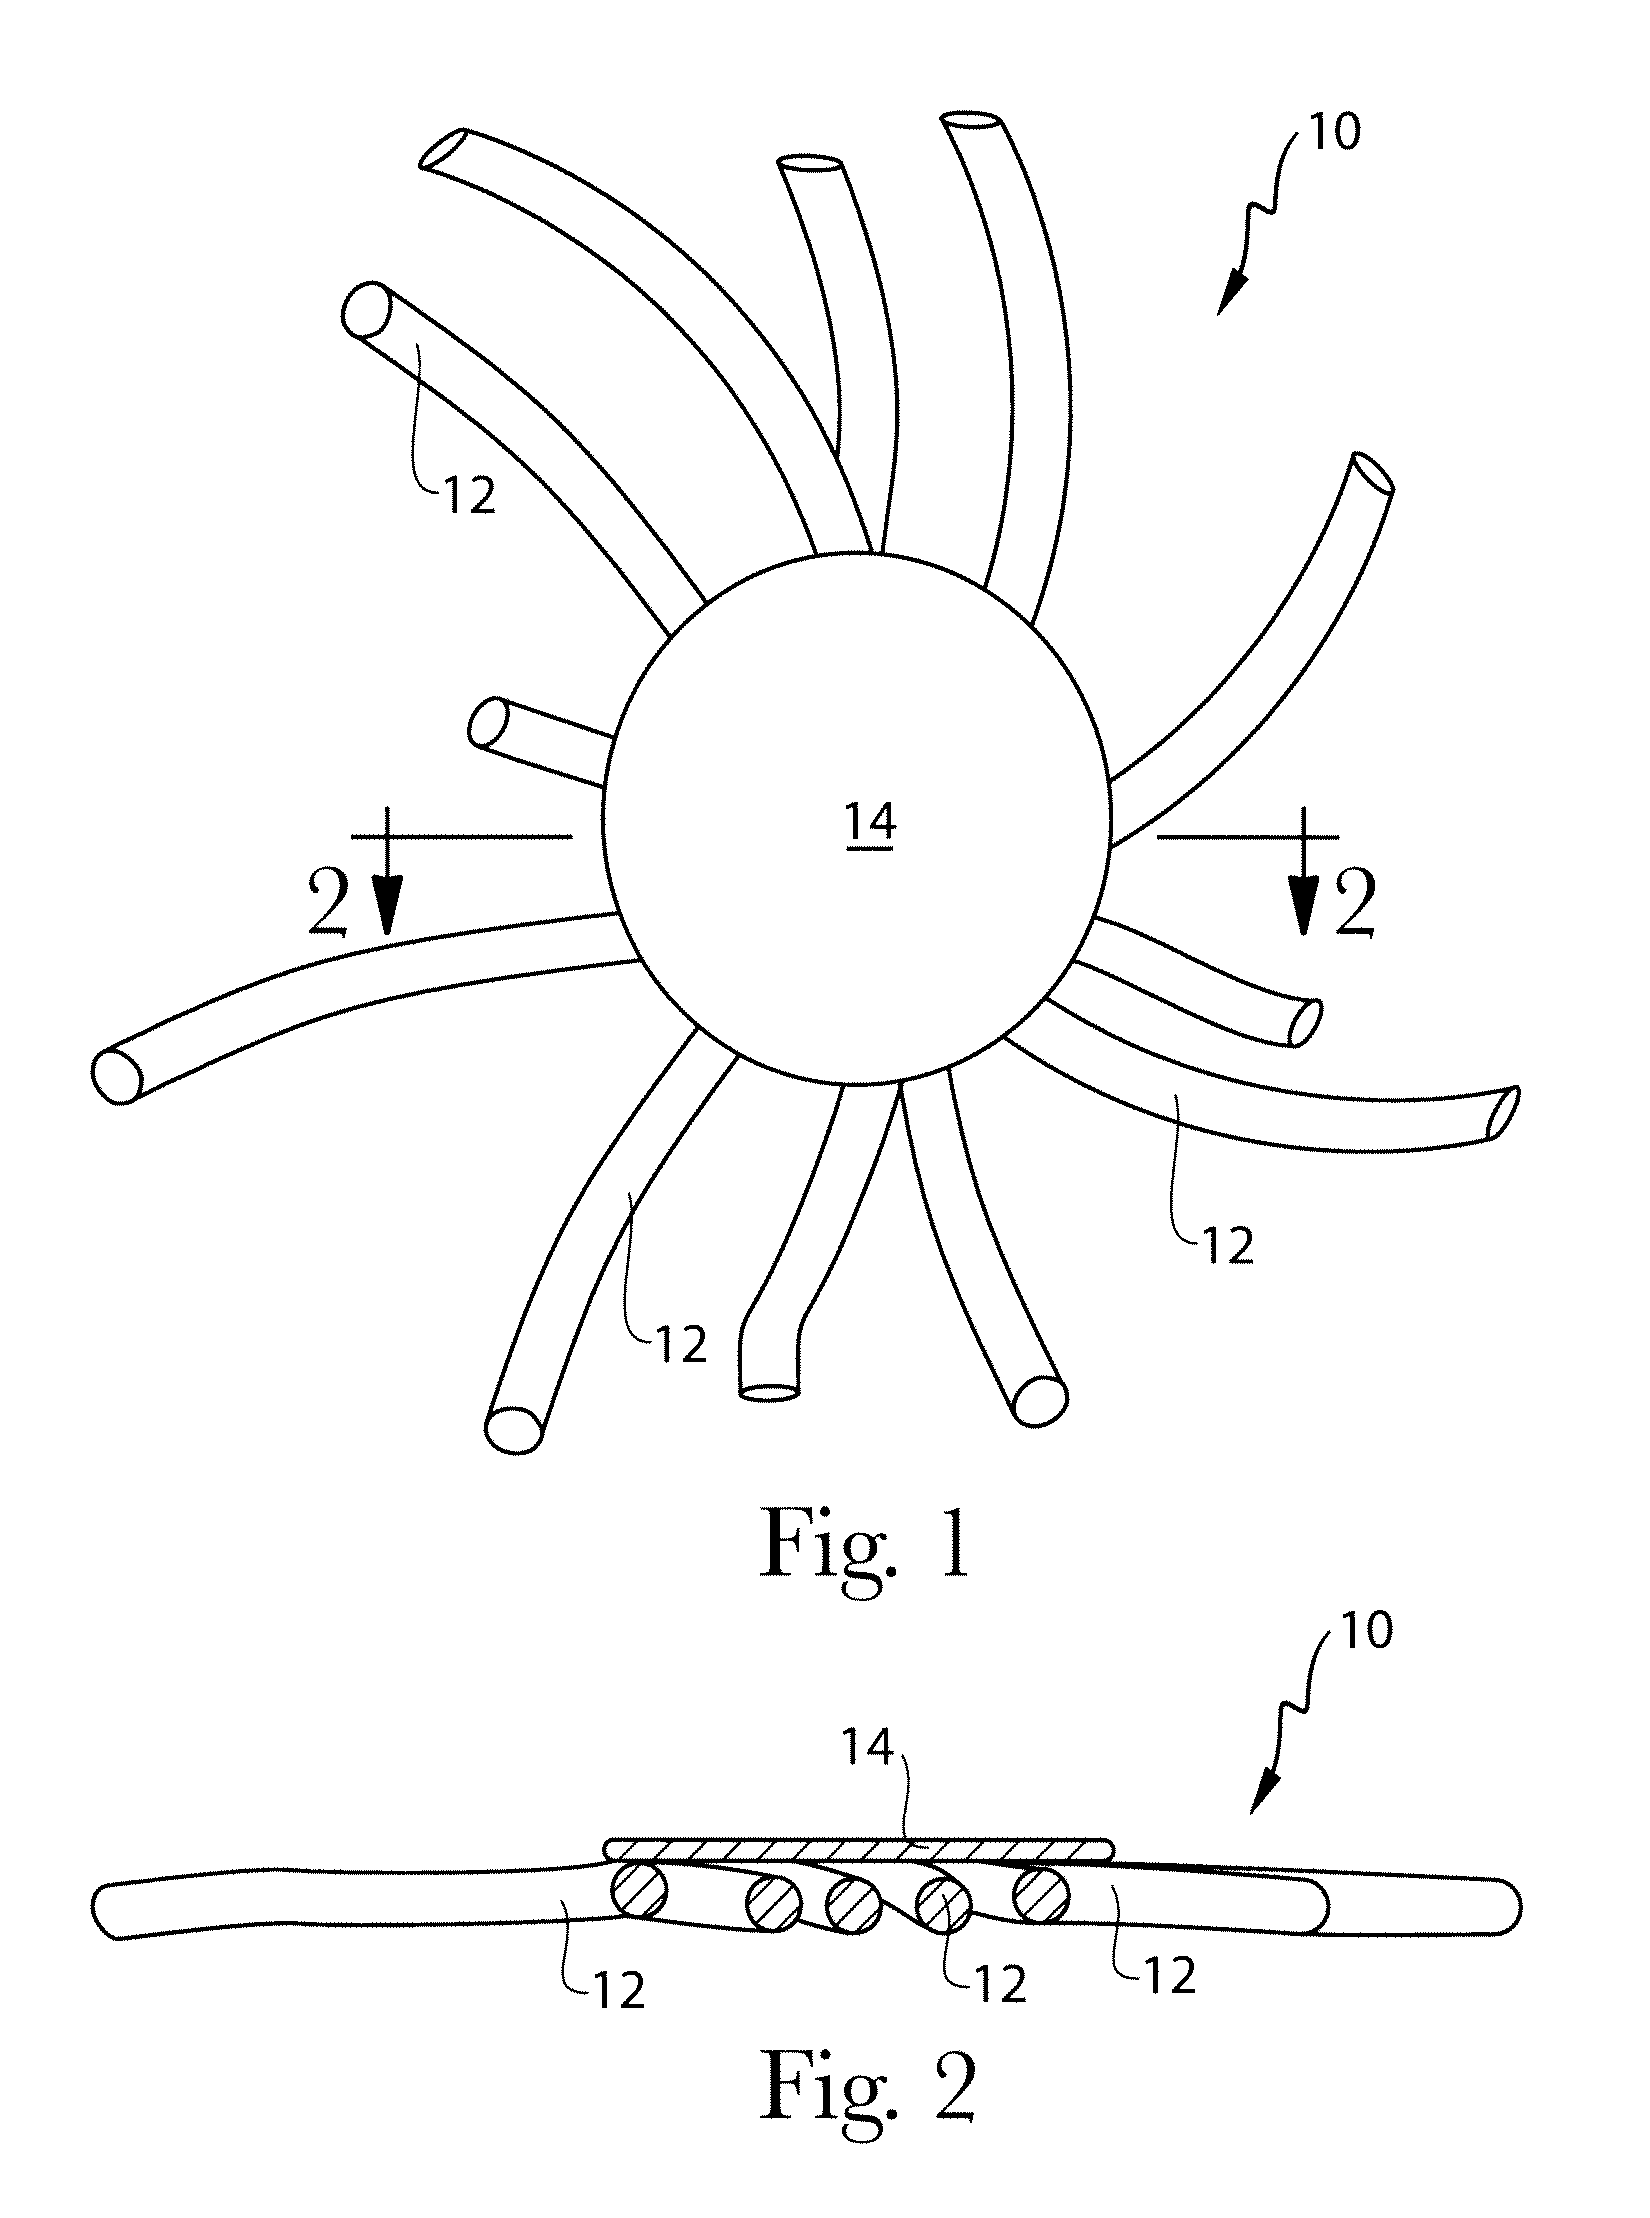 Filaments comprising an ingestible active agent nonwoven webs and methods for making same